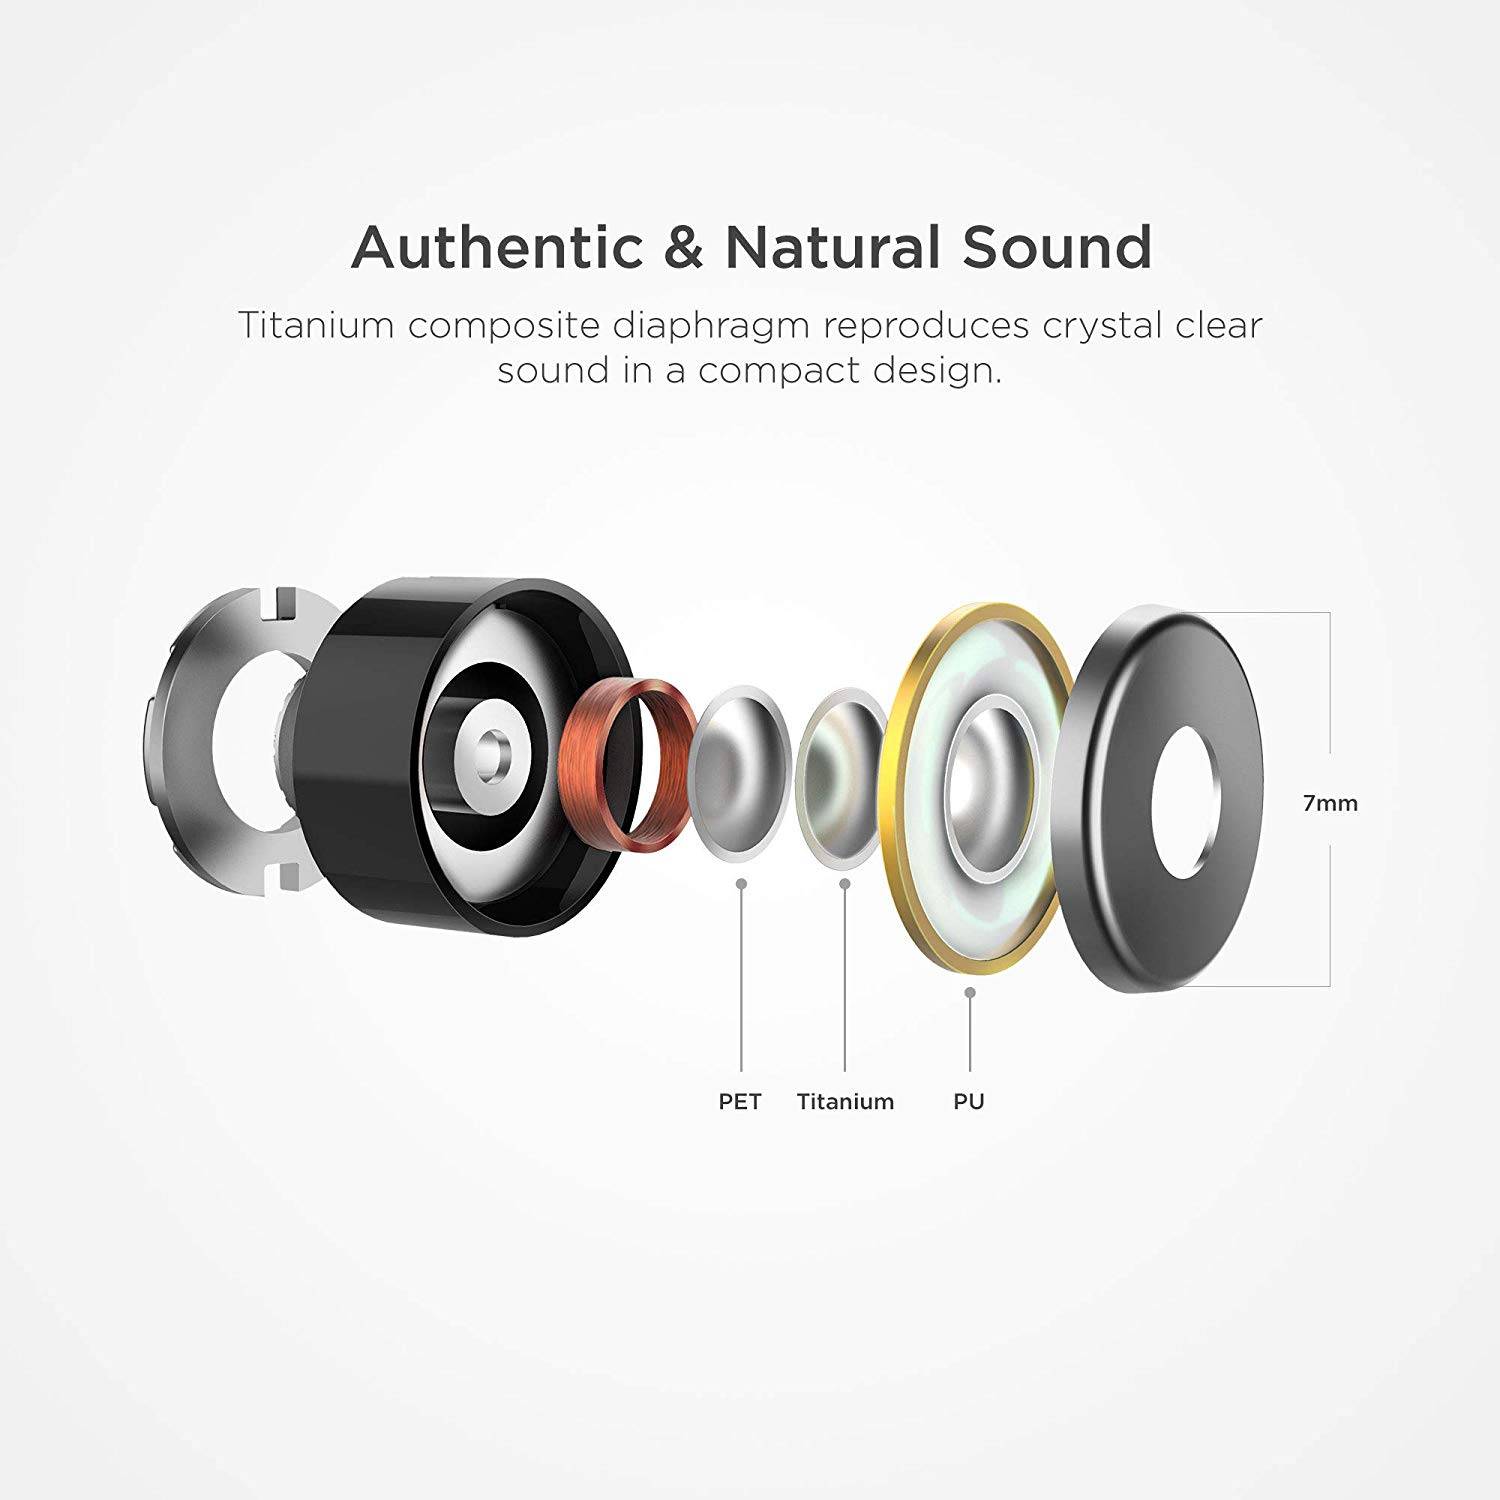 Excellent and improved sound quality